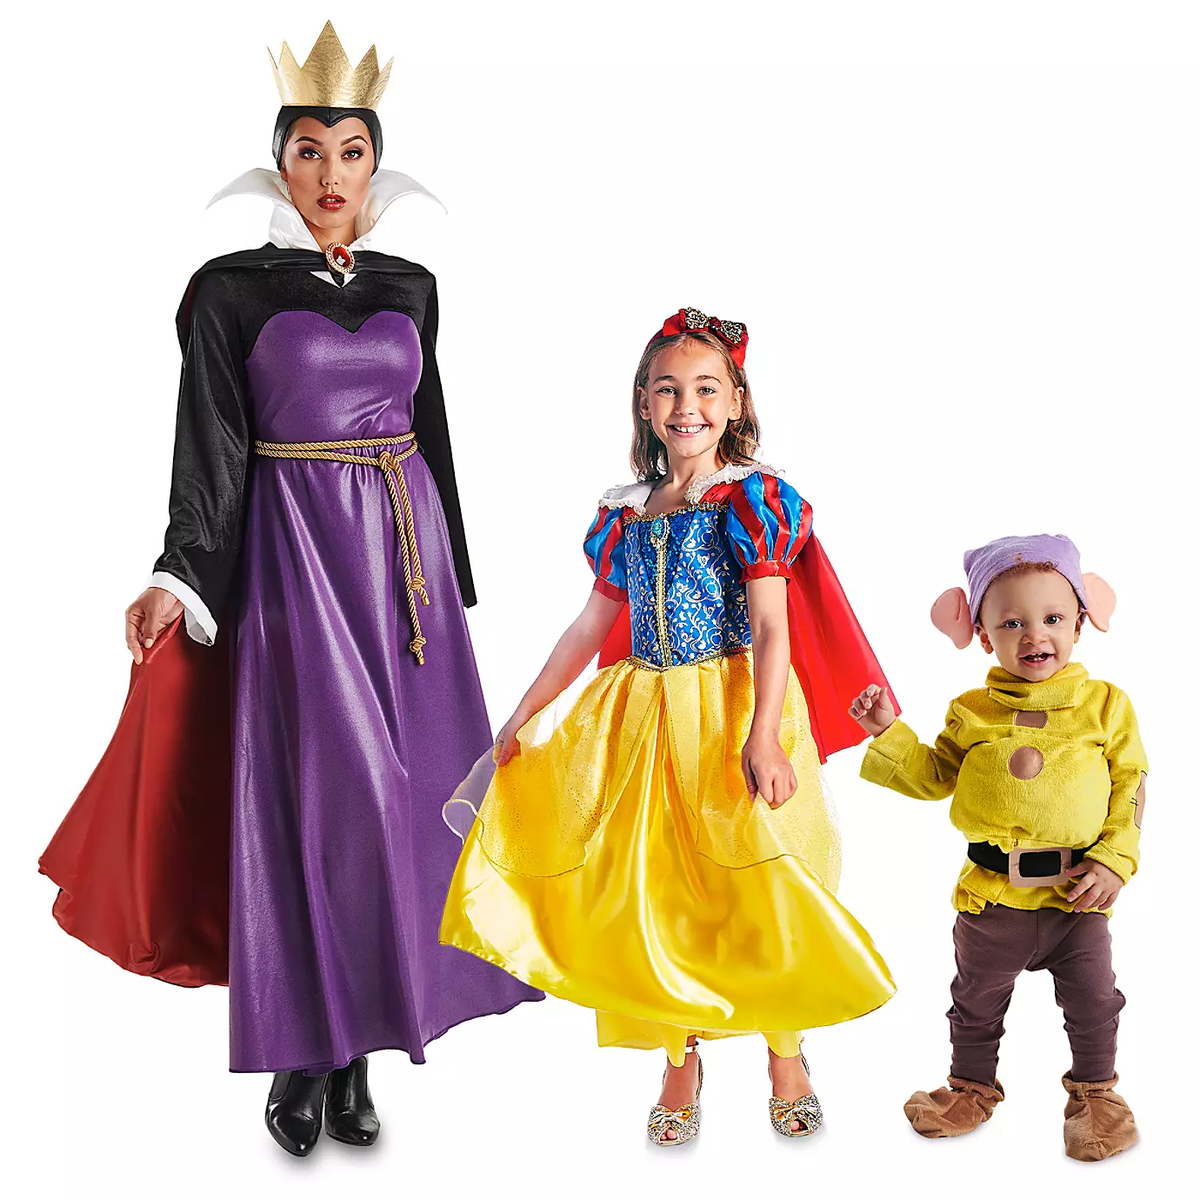 Snow White and the Seven Dwarfs Family Costume Collection